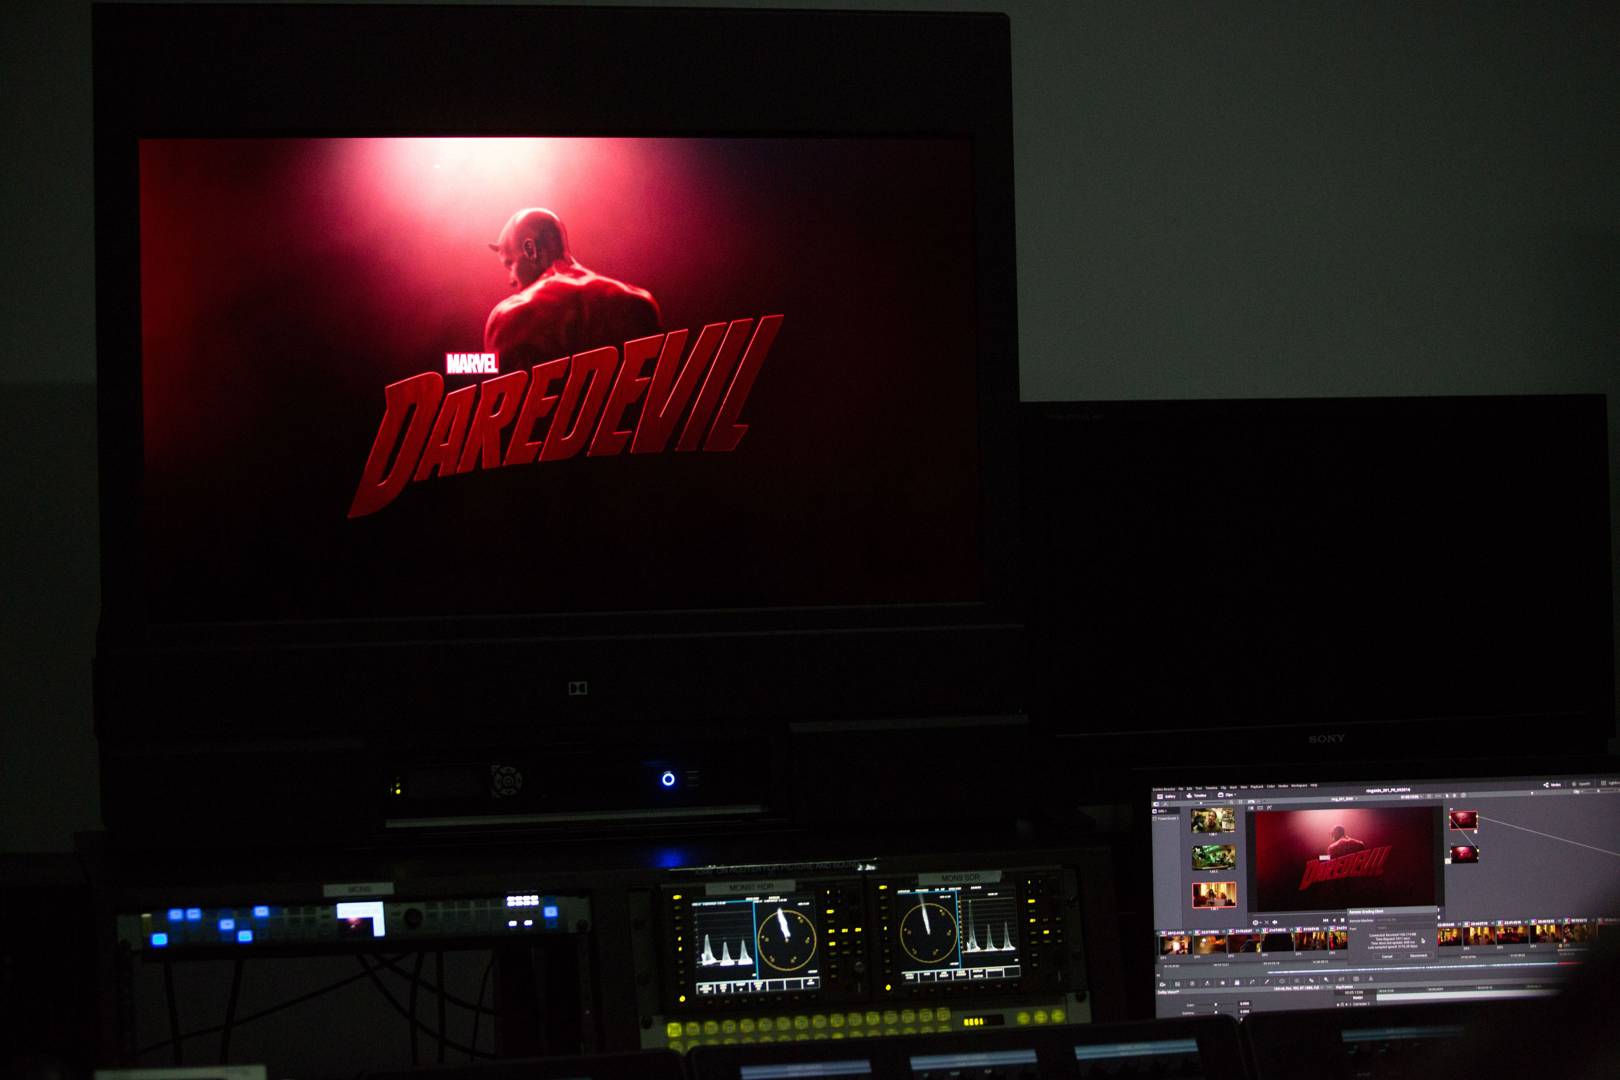 Beyond 4K: Netflix lets us in on plans to push the HDR revolution - starting with Iron Fist